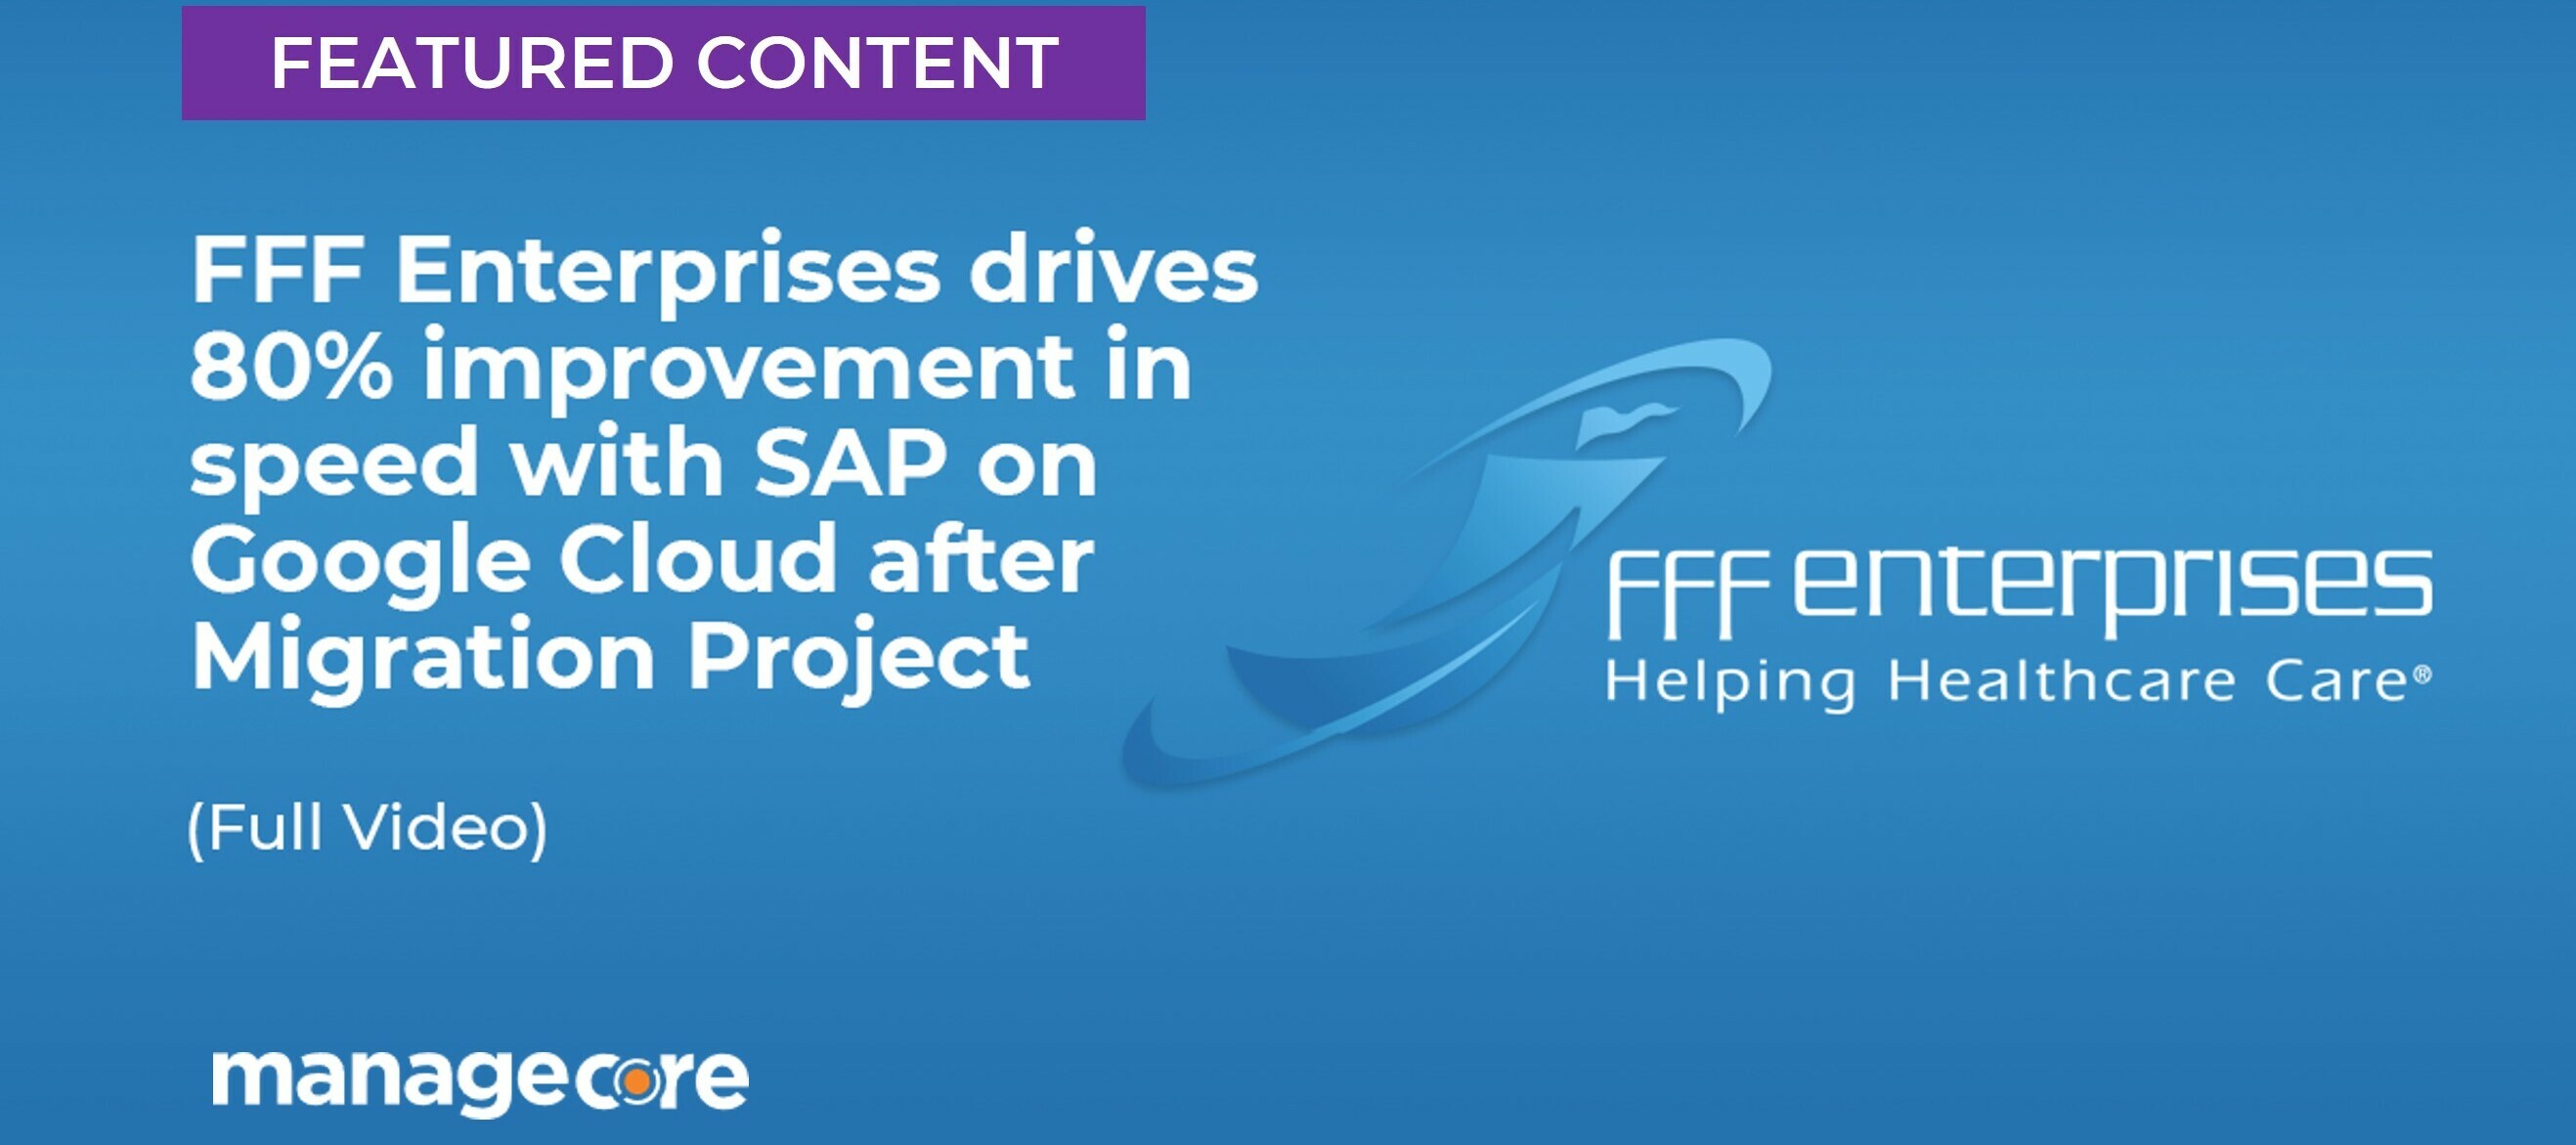 FFF Enterprises drives 80% improvement in speed with SAP on Google Cloud after Migration Project Completed by Managecore (Full Video)